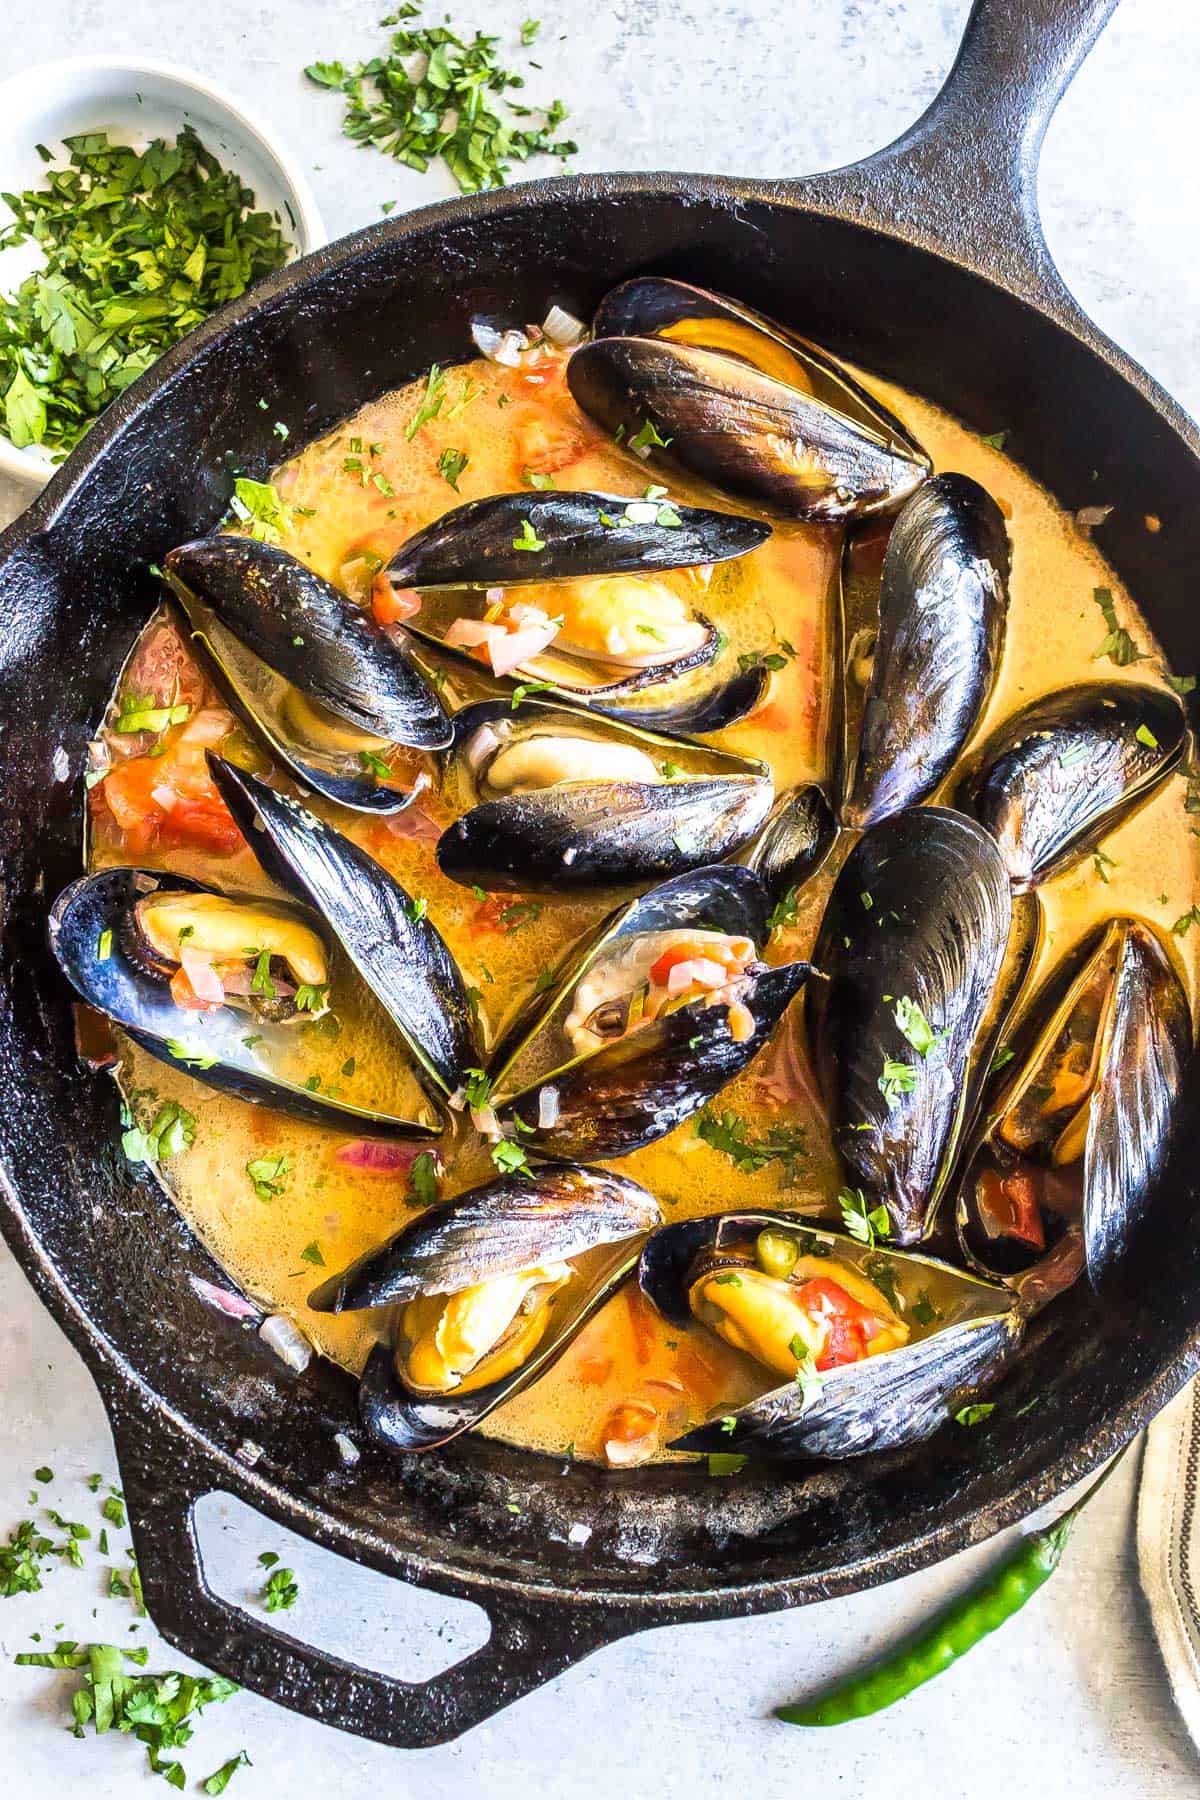 Chilli Mussels in a cast iron skillet